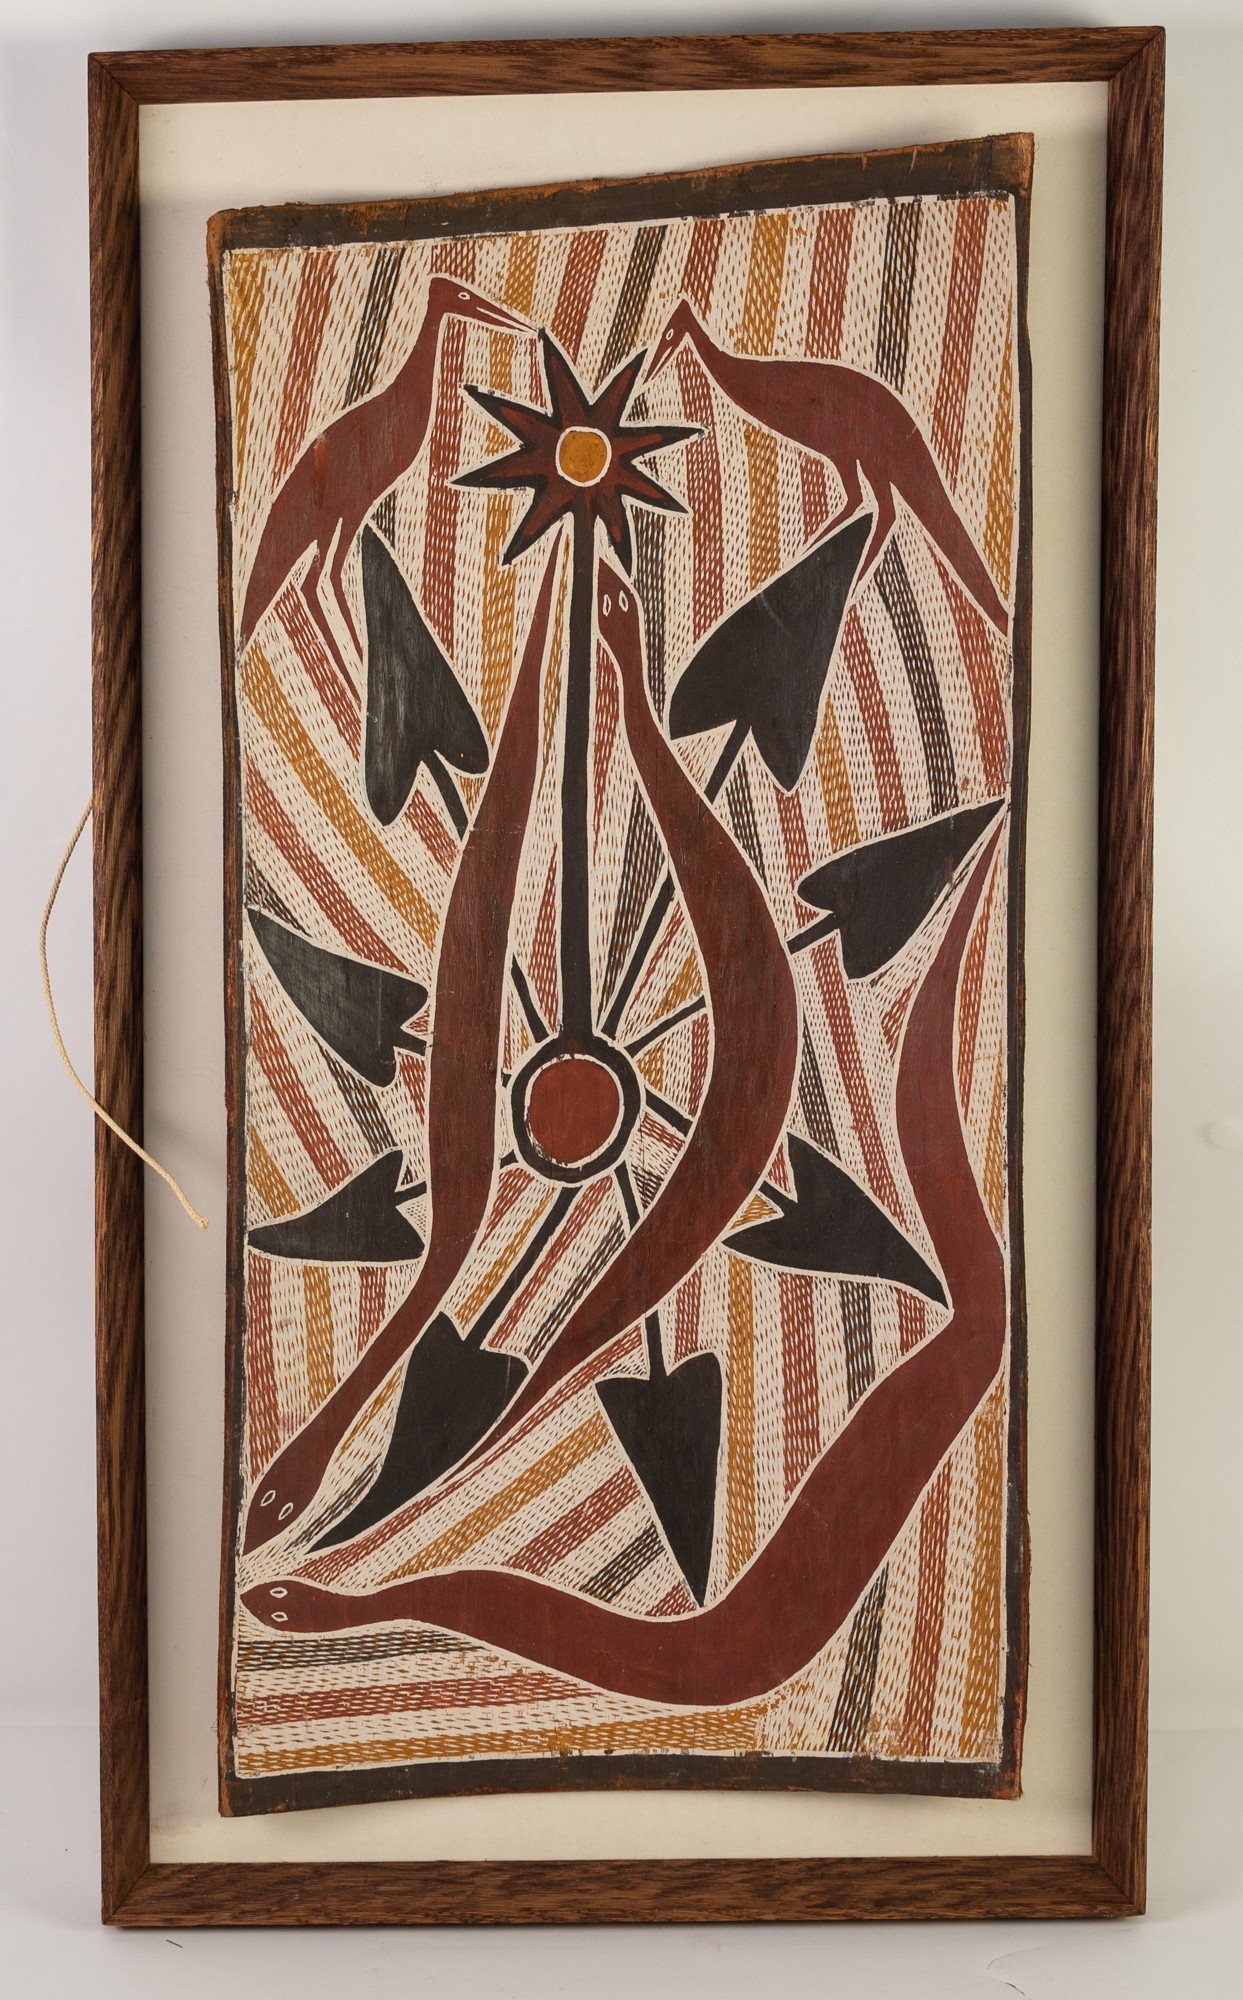 1960s AUSTRALIAN NORTHERN TERRITORY ABORIGINAL TREE BARK PICTURE, depicting two wading birds and